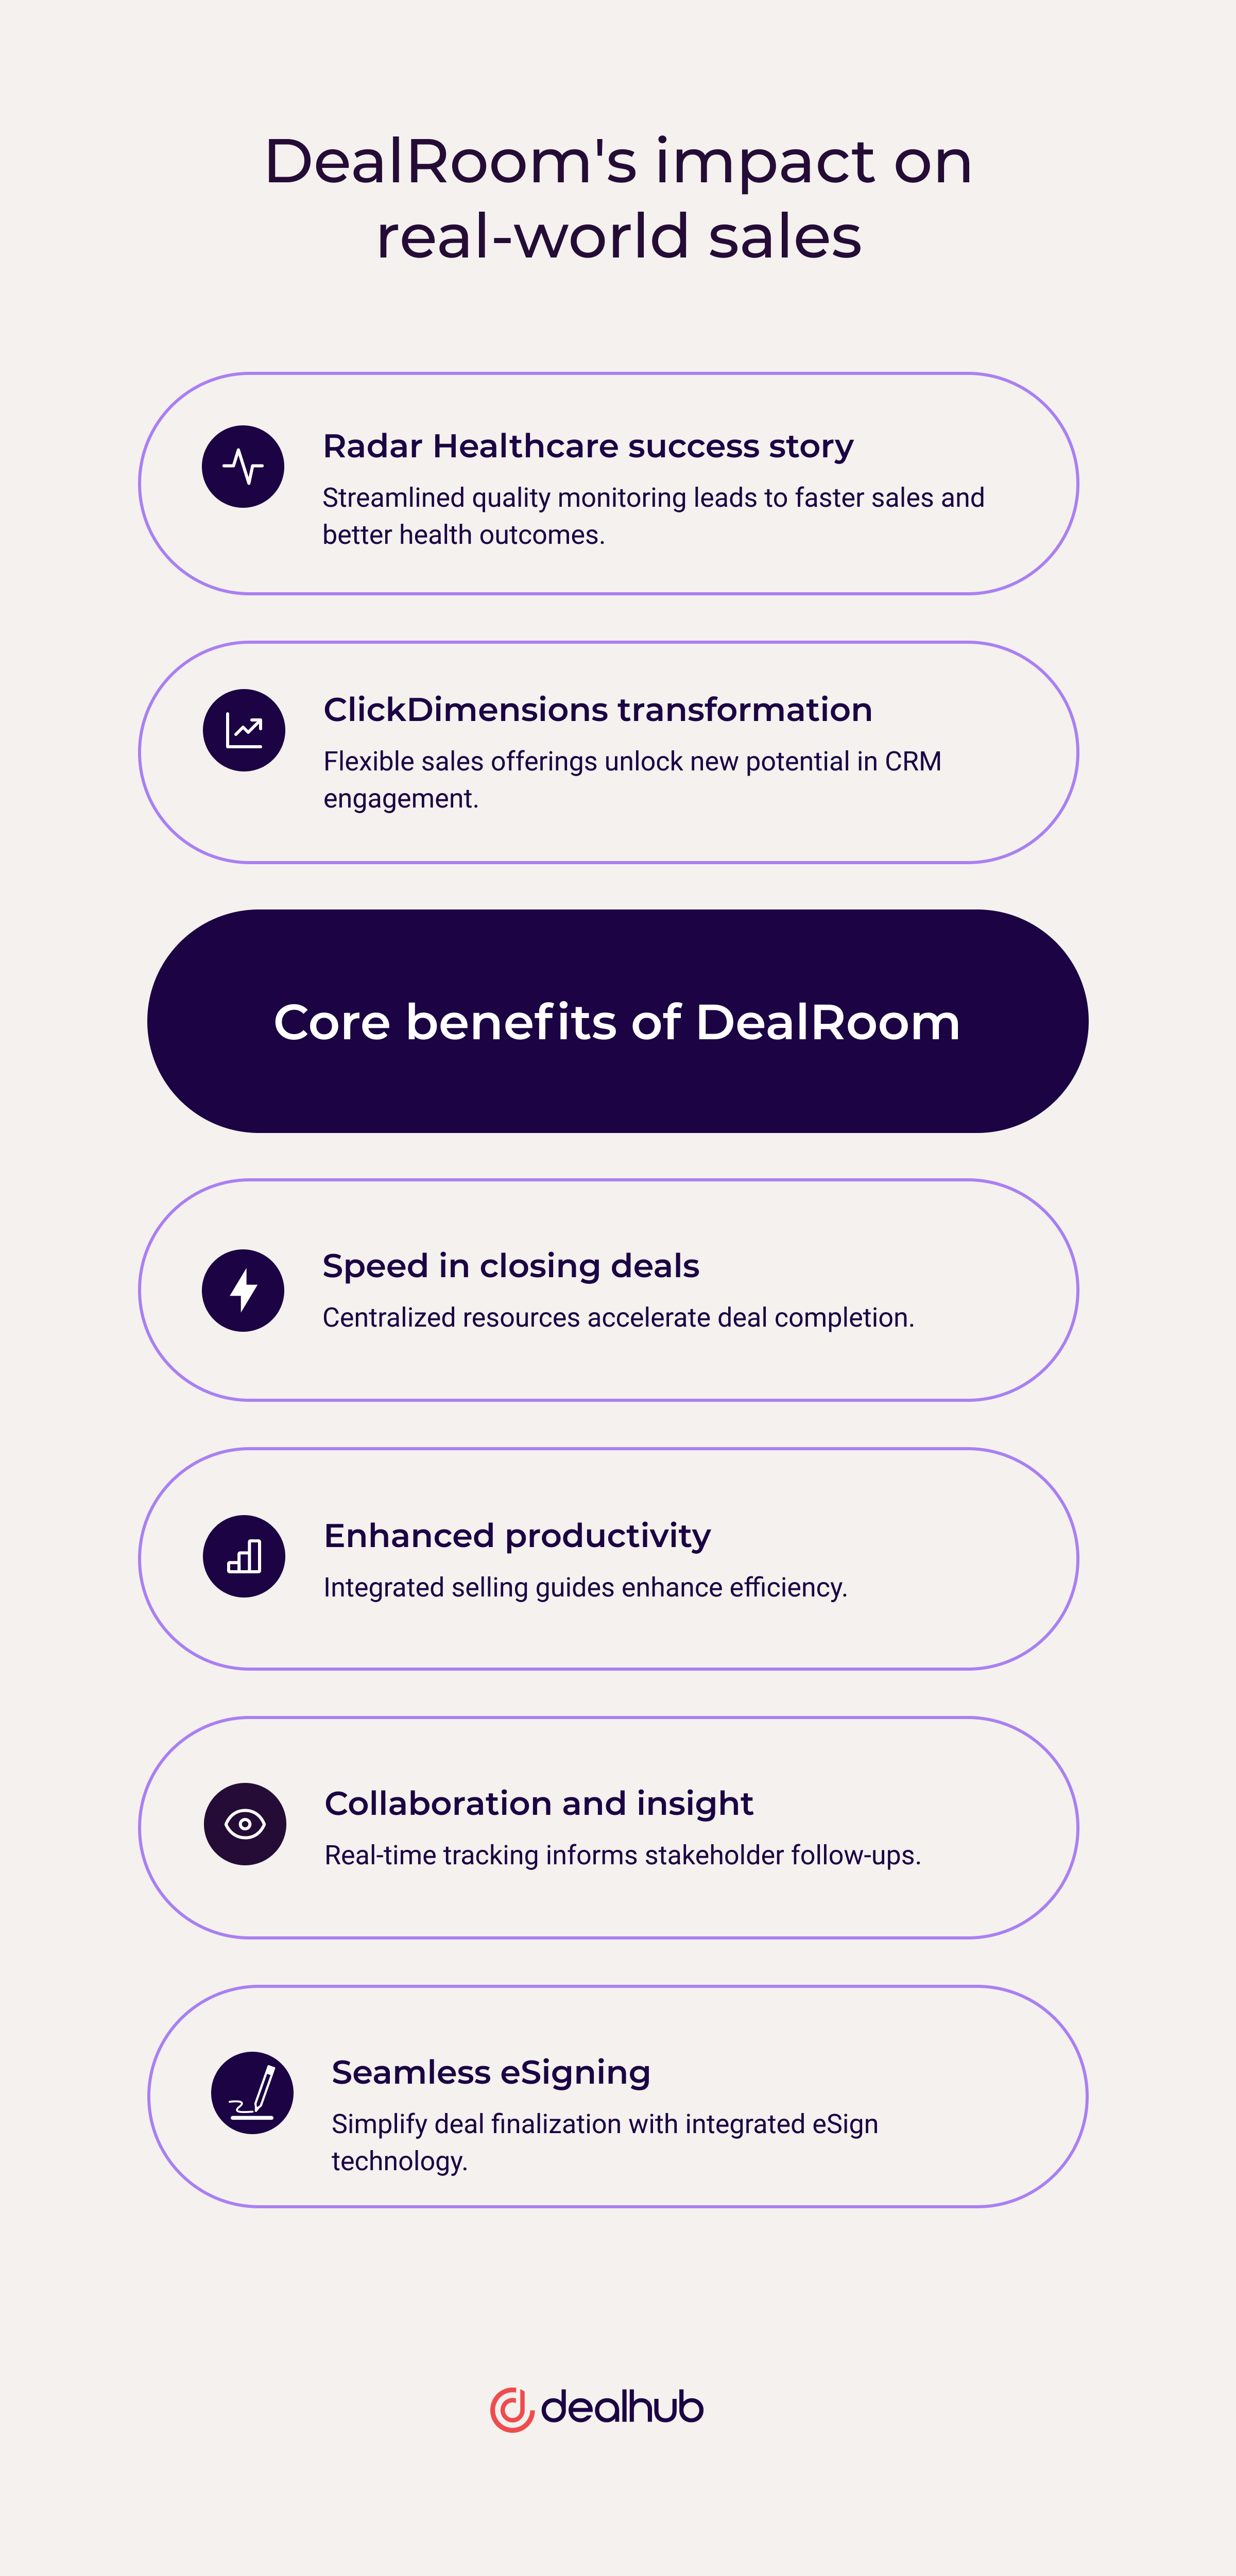 DealRoom's impact on real-world sales